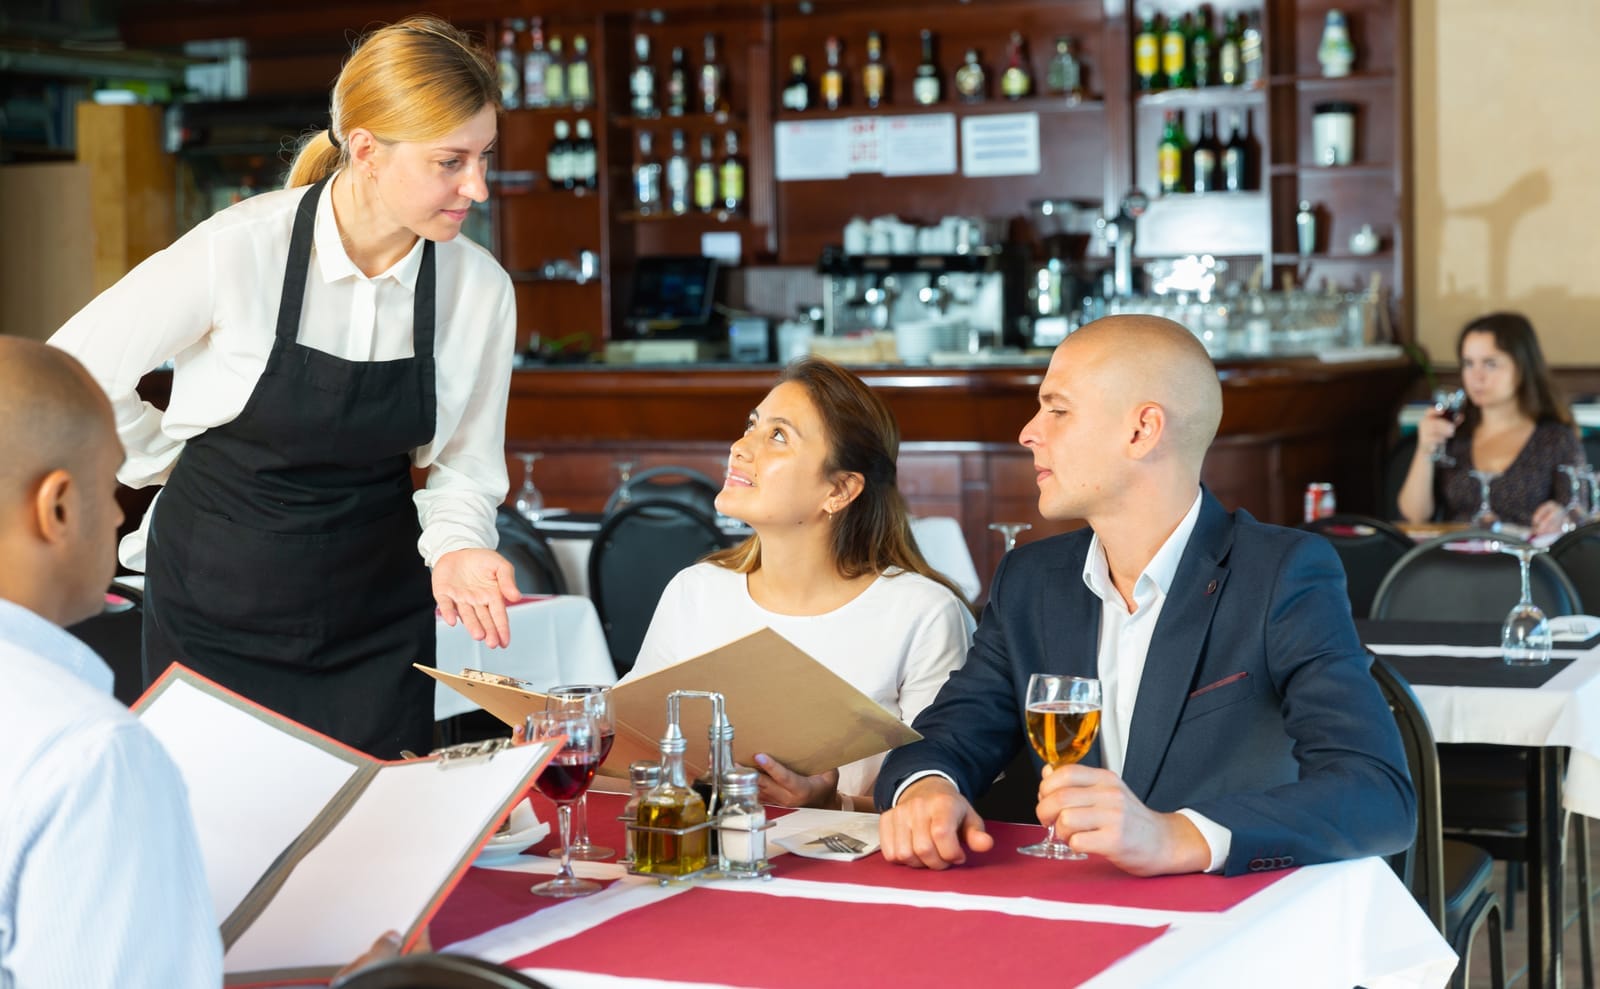 Guests ordering from waitress in restaurant serving a prix fixe menu lunch dinner special